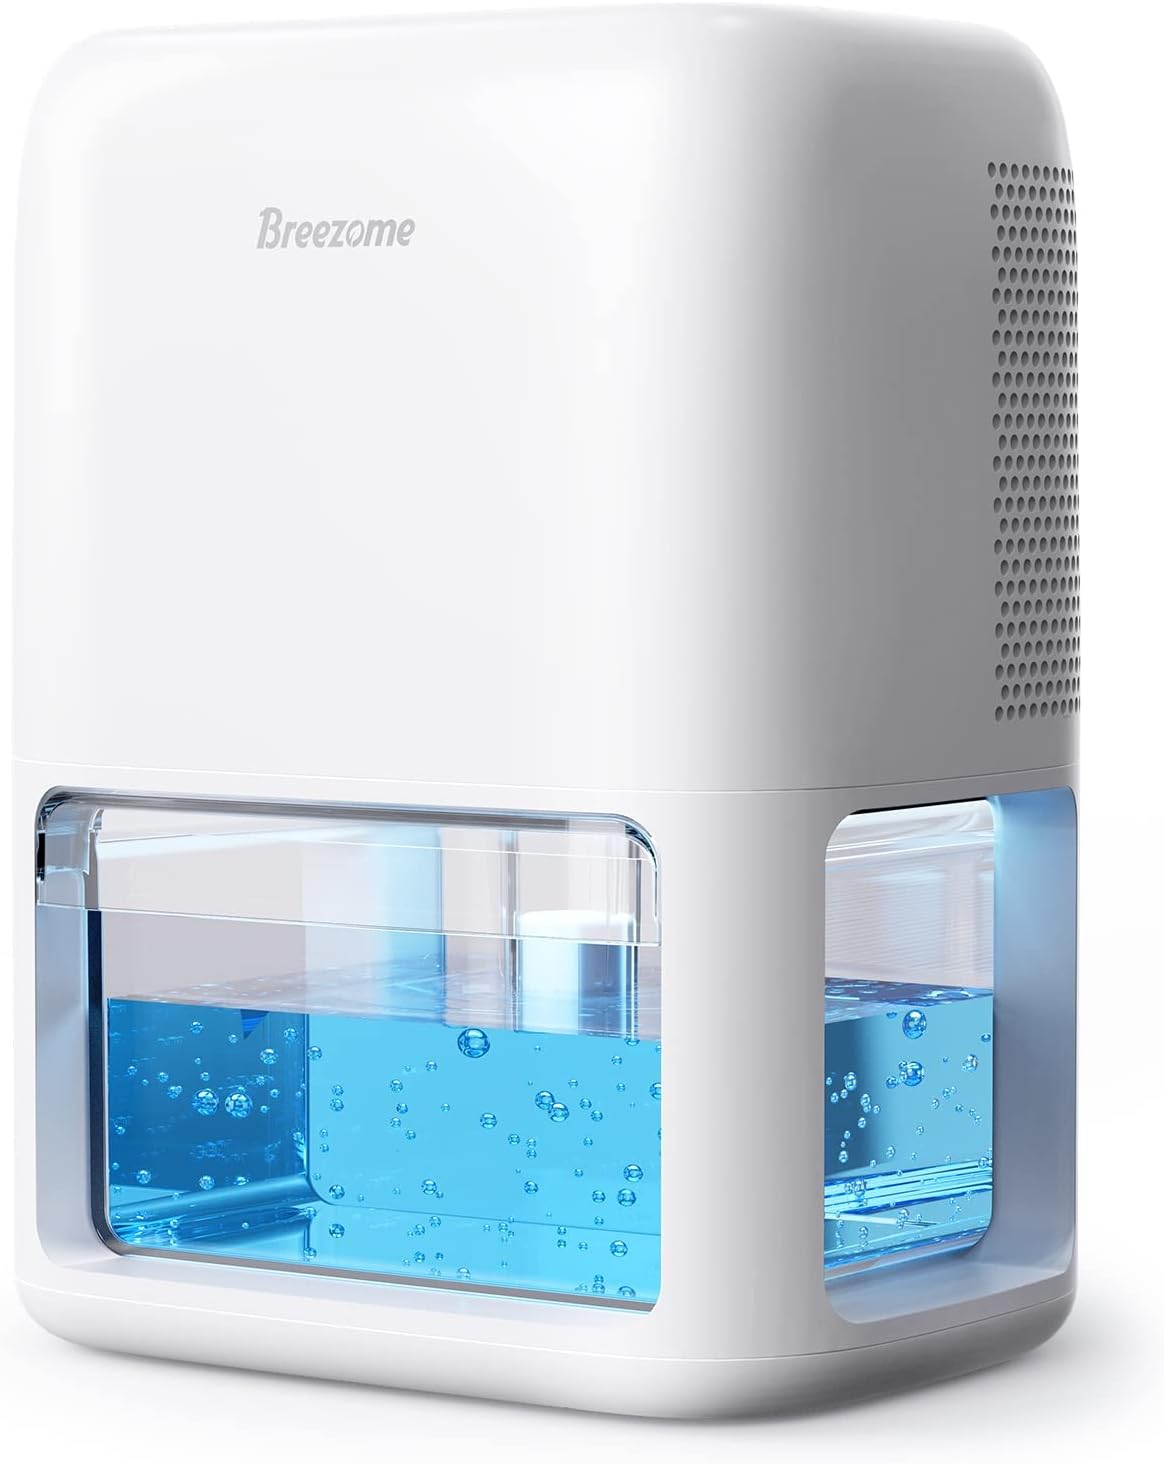 BREEZOME 60 OZ Dehumidifiers for Home, Up to 500 sq ft [...]